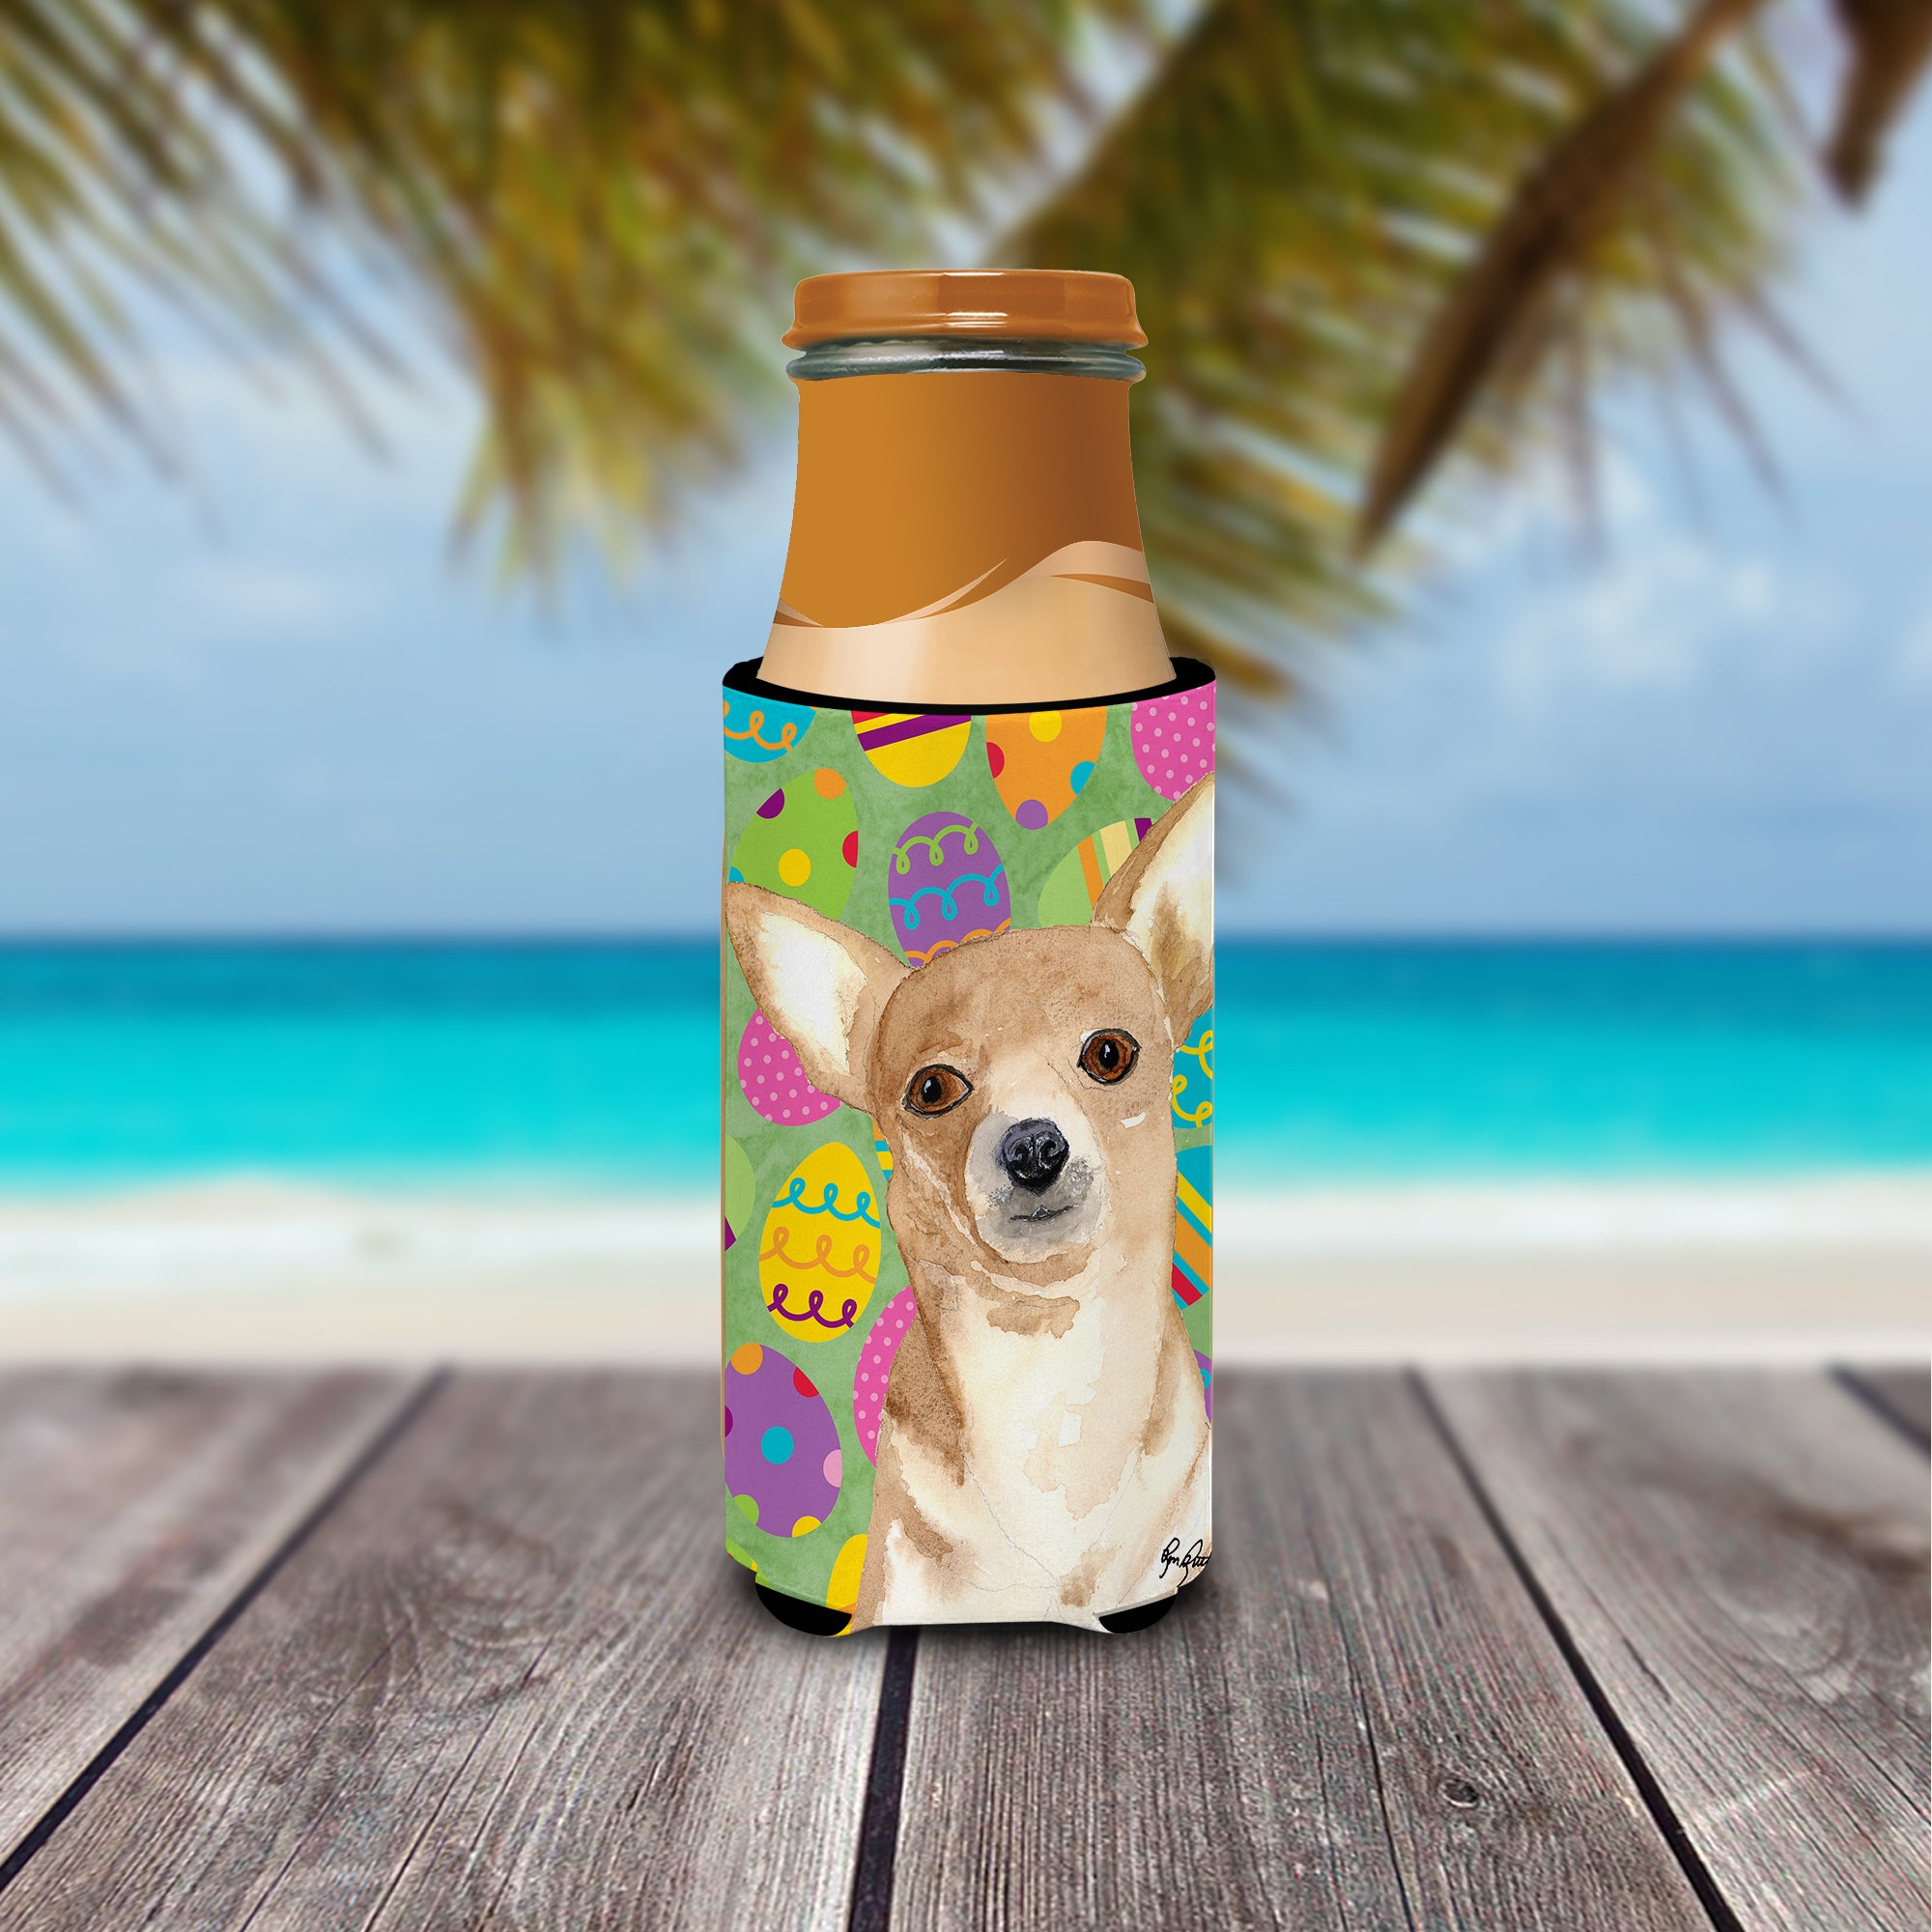 Eggravaganza Chihuahua Easter Ultra Beverage Insulators for slim cans  RDR3017MUK.